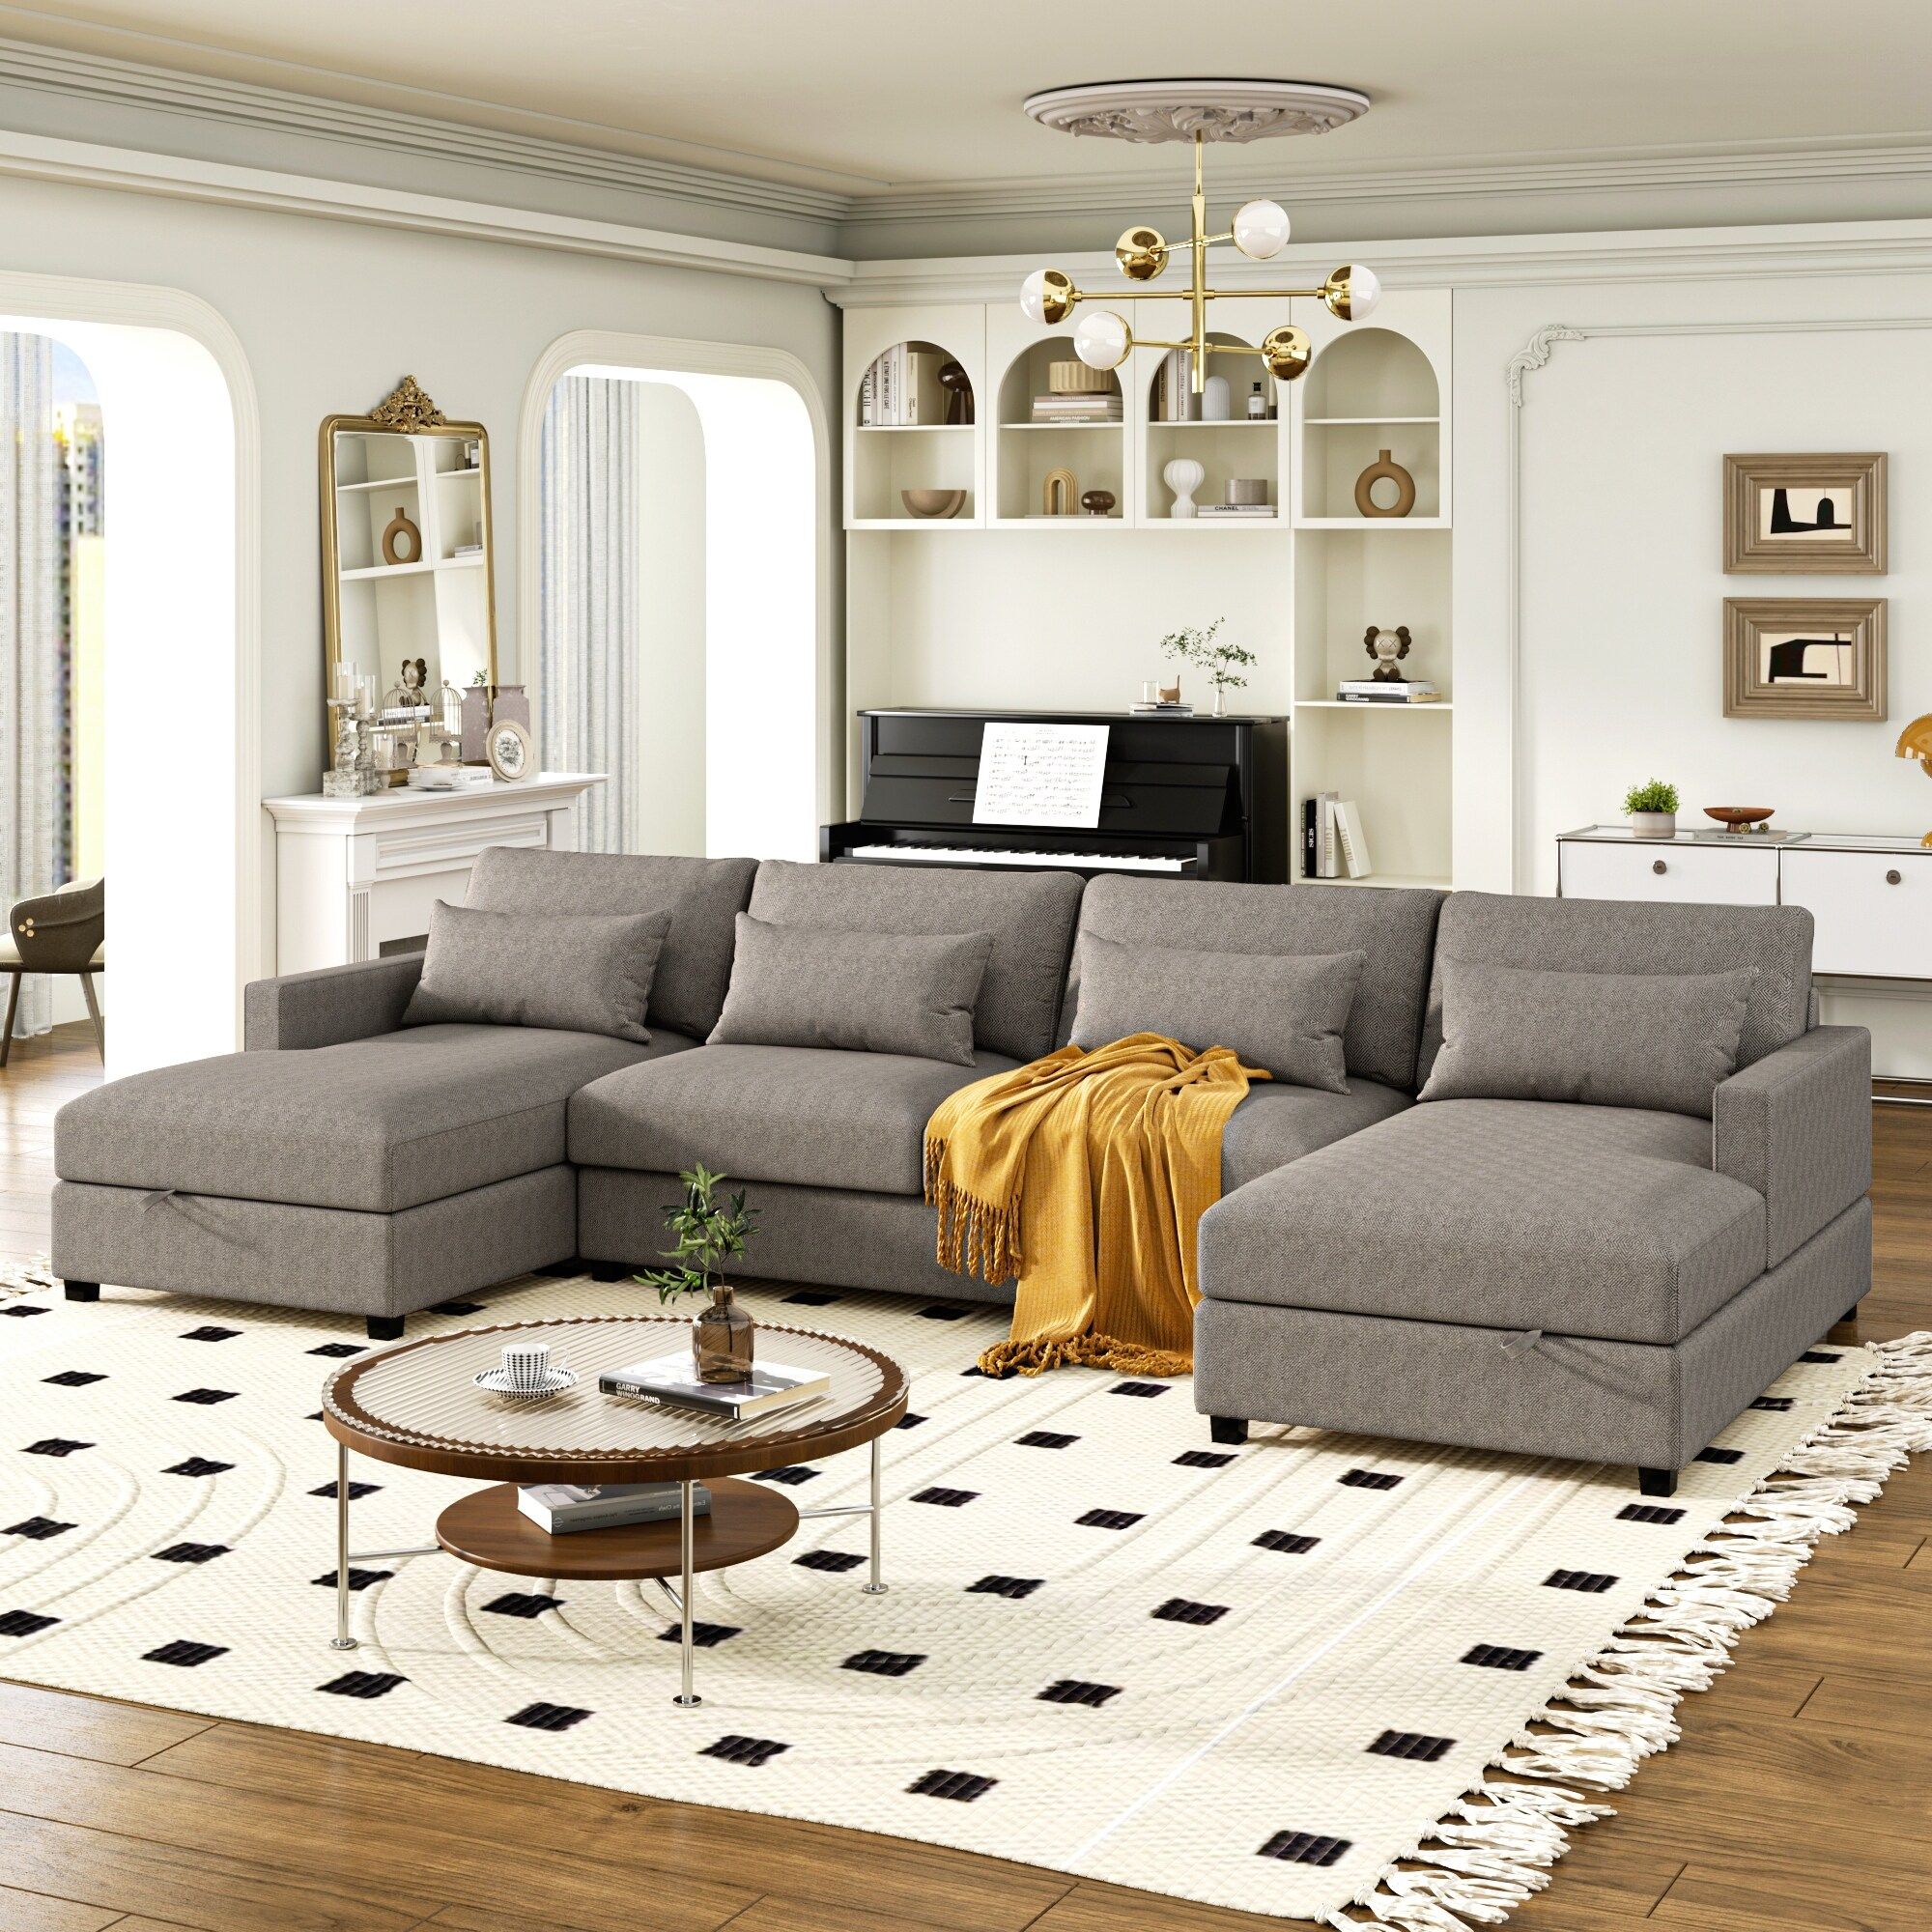 Gray Modern U Shape Sectional Sofa With 4 Pillows & Storage Chaise – Bed  Bath & Beyond – 39018582 Throughout Modern U Shape Sectional Sofas In Gray (View 9 of 15)